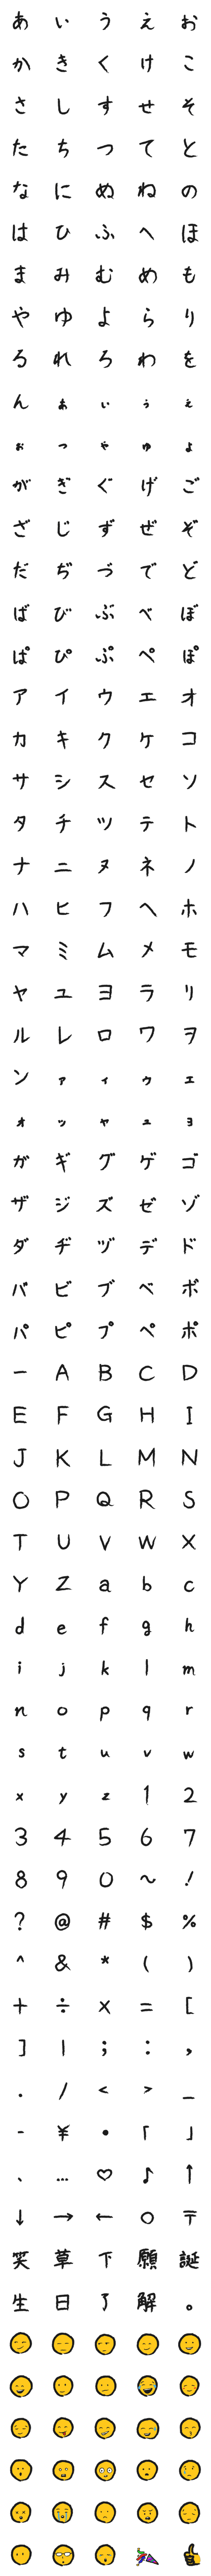 [LINE絵文字]俺の手書きの画像一覧